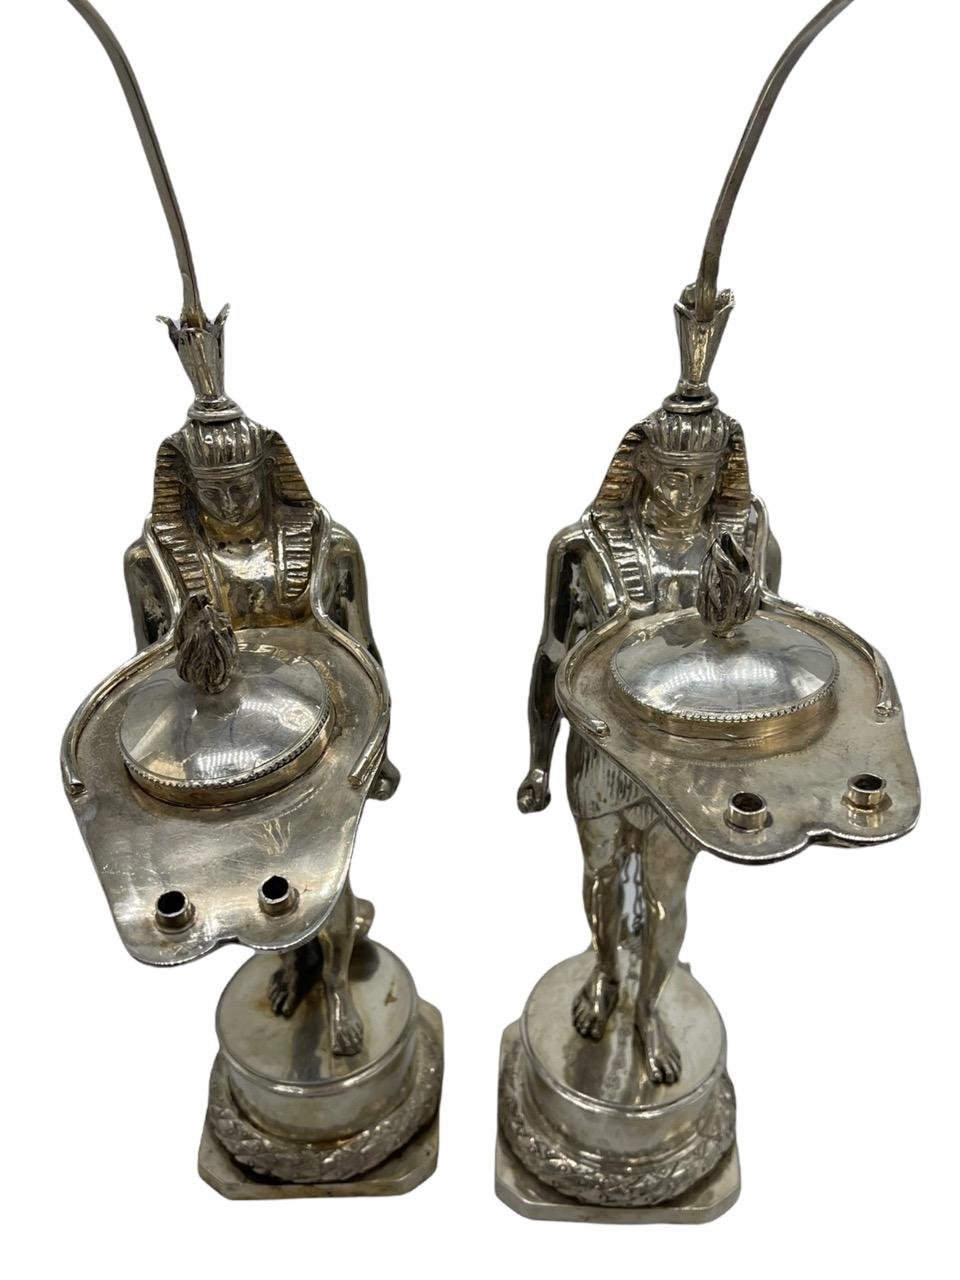 Pair of Early 19th Century Italian Antique Silver Oil Lamps by Vincenzo Belli II 5